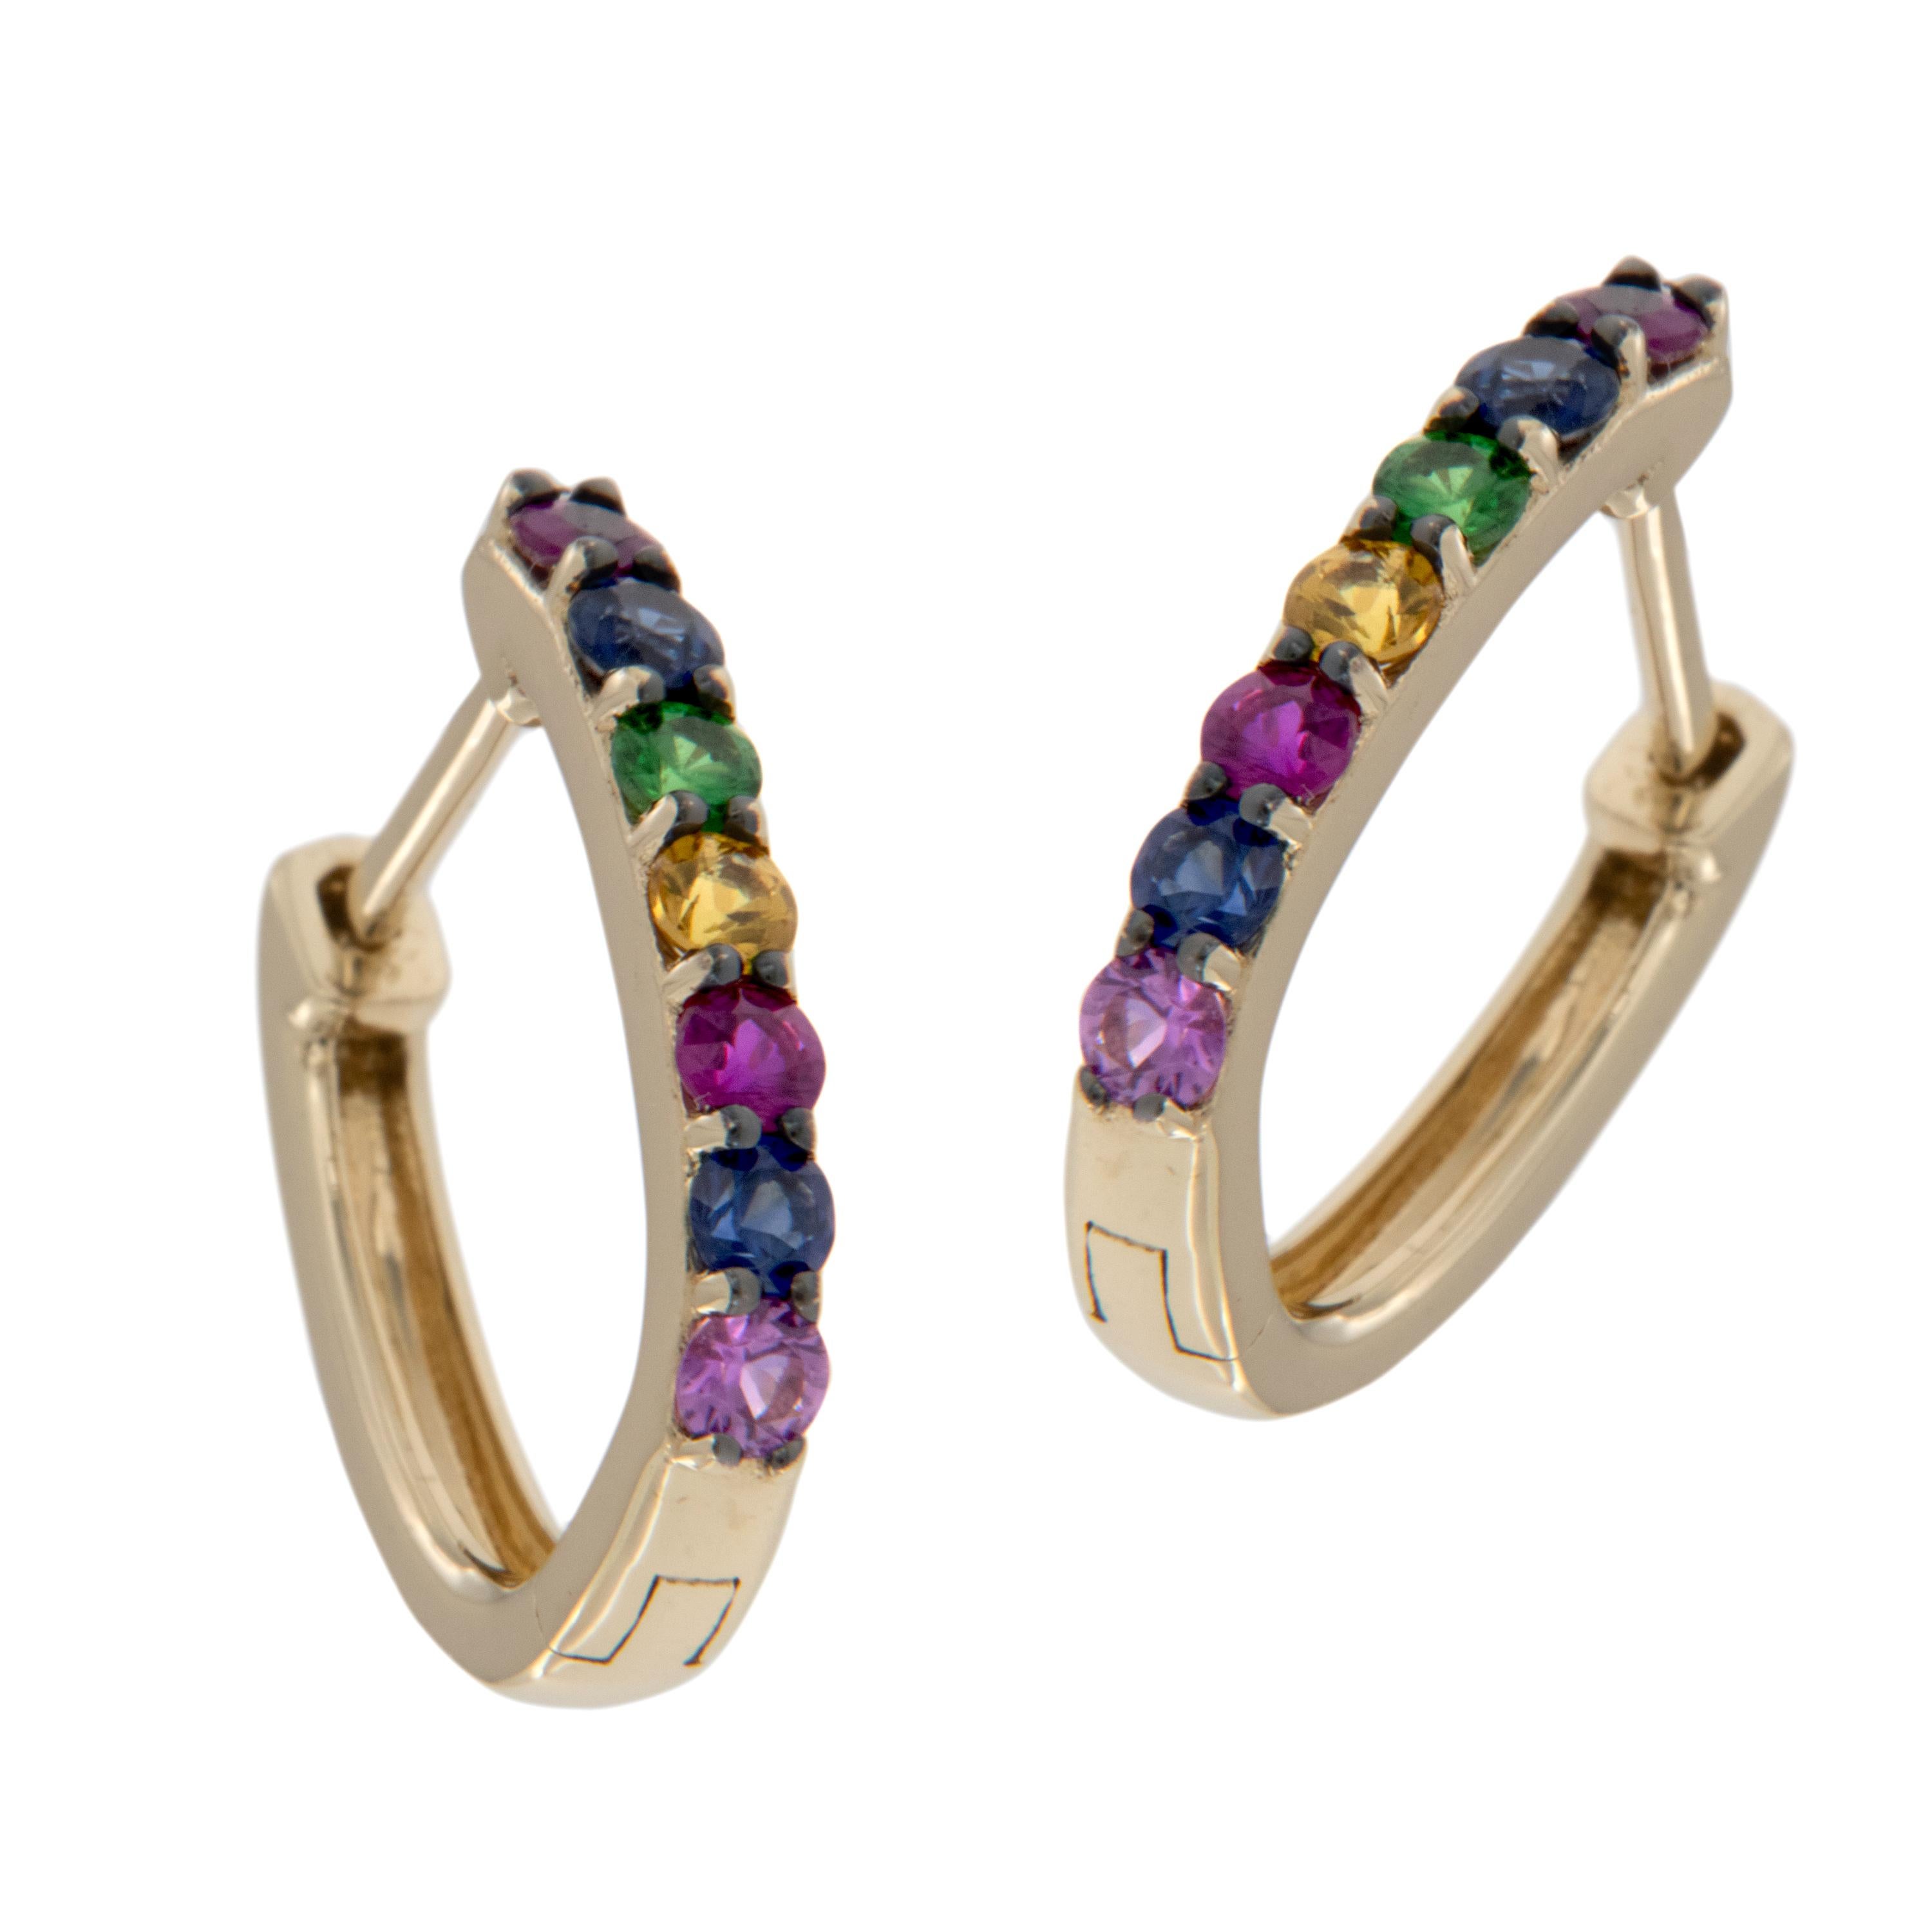 Your own little pot of gold at the end of the rainbow! You could be the owner of these fun & colorful gemstone earrings with 0.70 Cttw. of precious gemstones ( multi colored sapphires, rubies & tsavorites) in classic oval fashion! A rainbow always